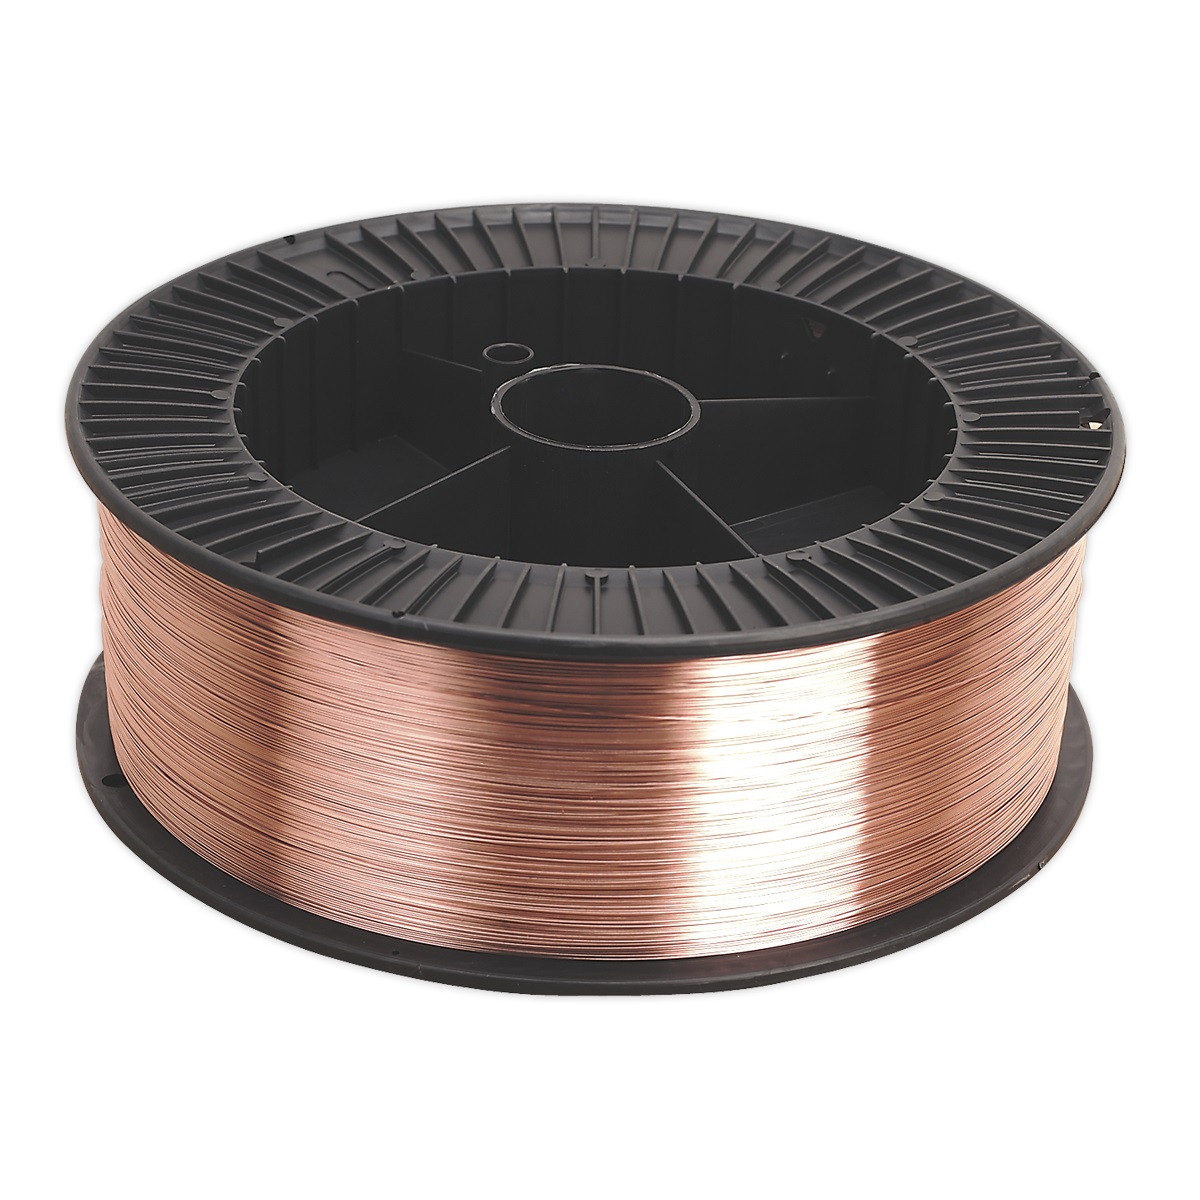 Sealey Mild Steel MIG Wire 15kg 1mm A18 Grade MIG/888810 | 15kg x 1mm reel of top quality wound mild steel welding wire manufactured to BS EN ISO 14341:2008. | toolforce.ie